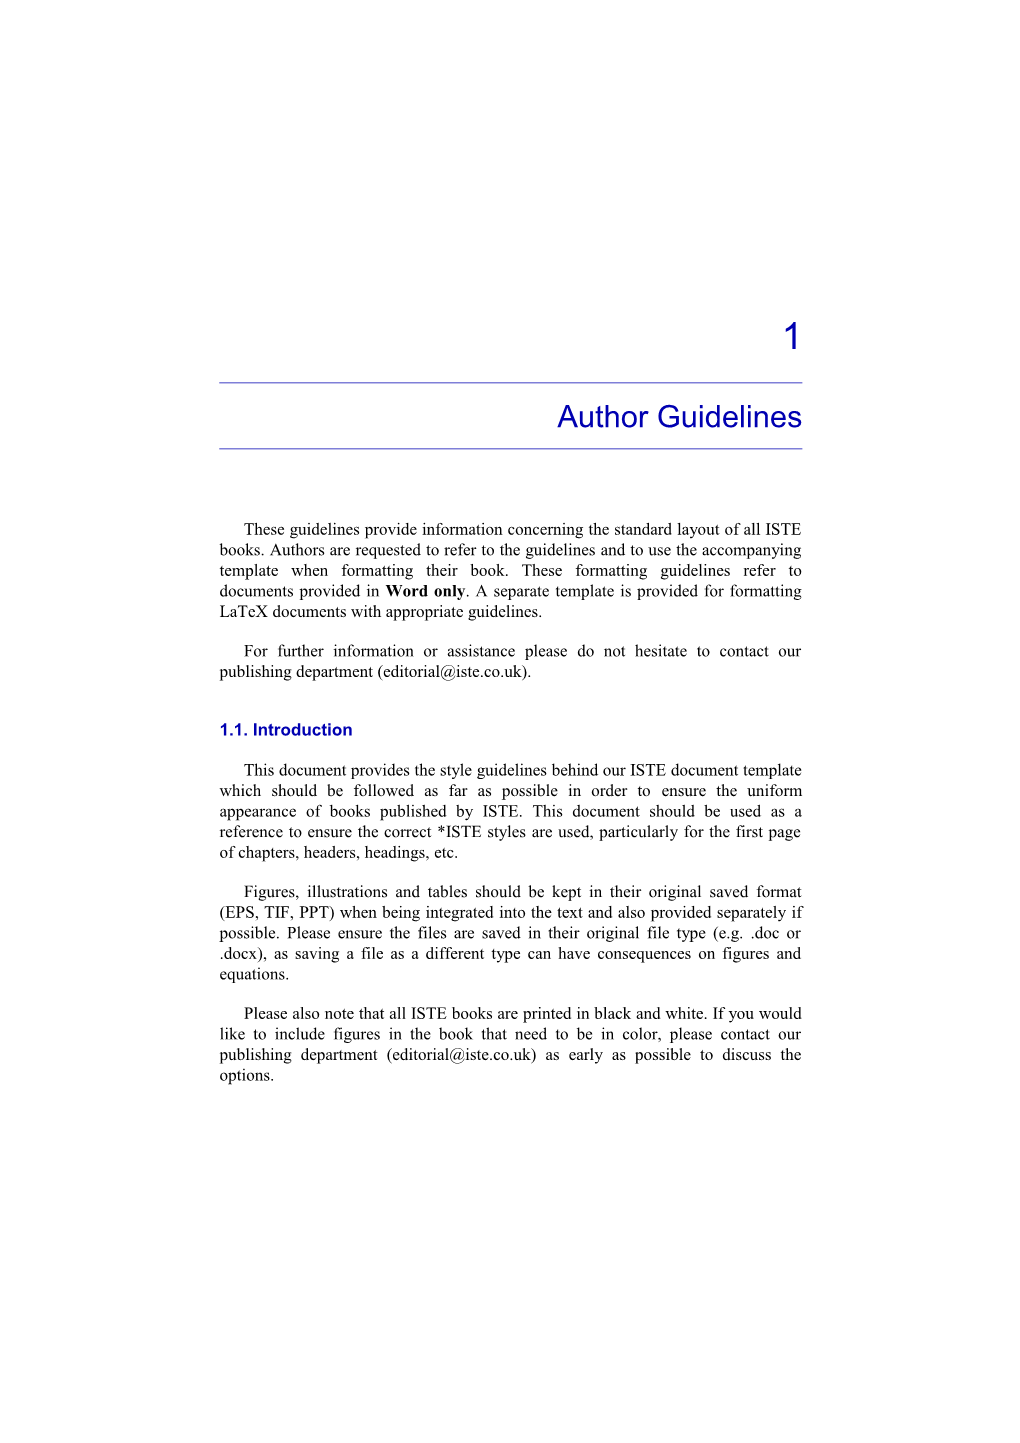 Author Guidelines 3